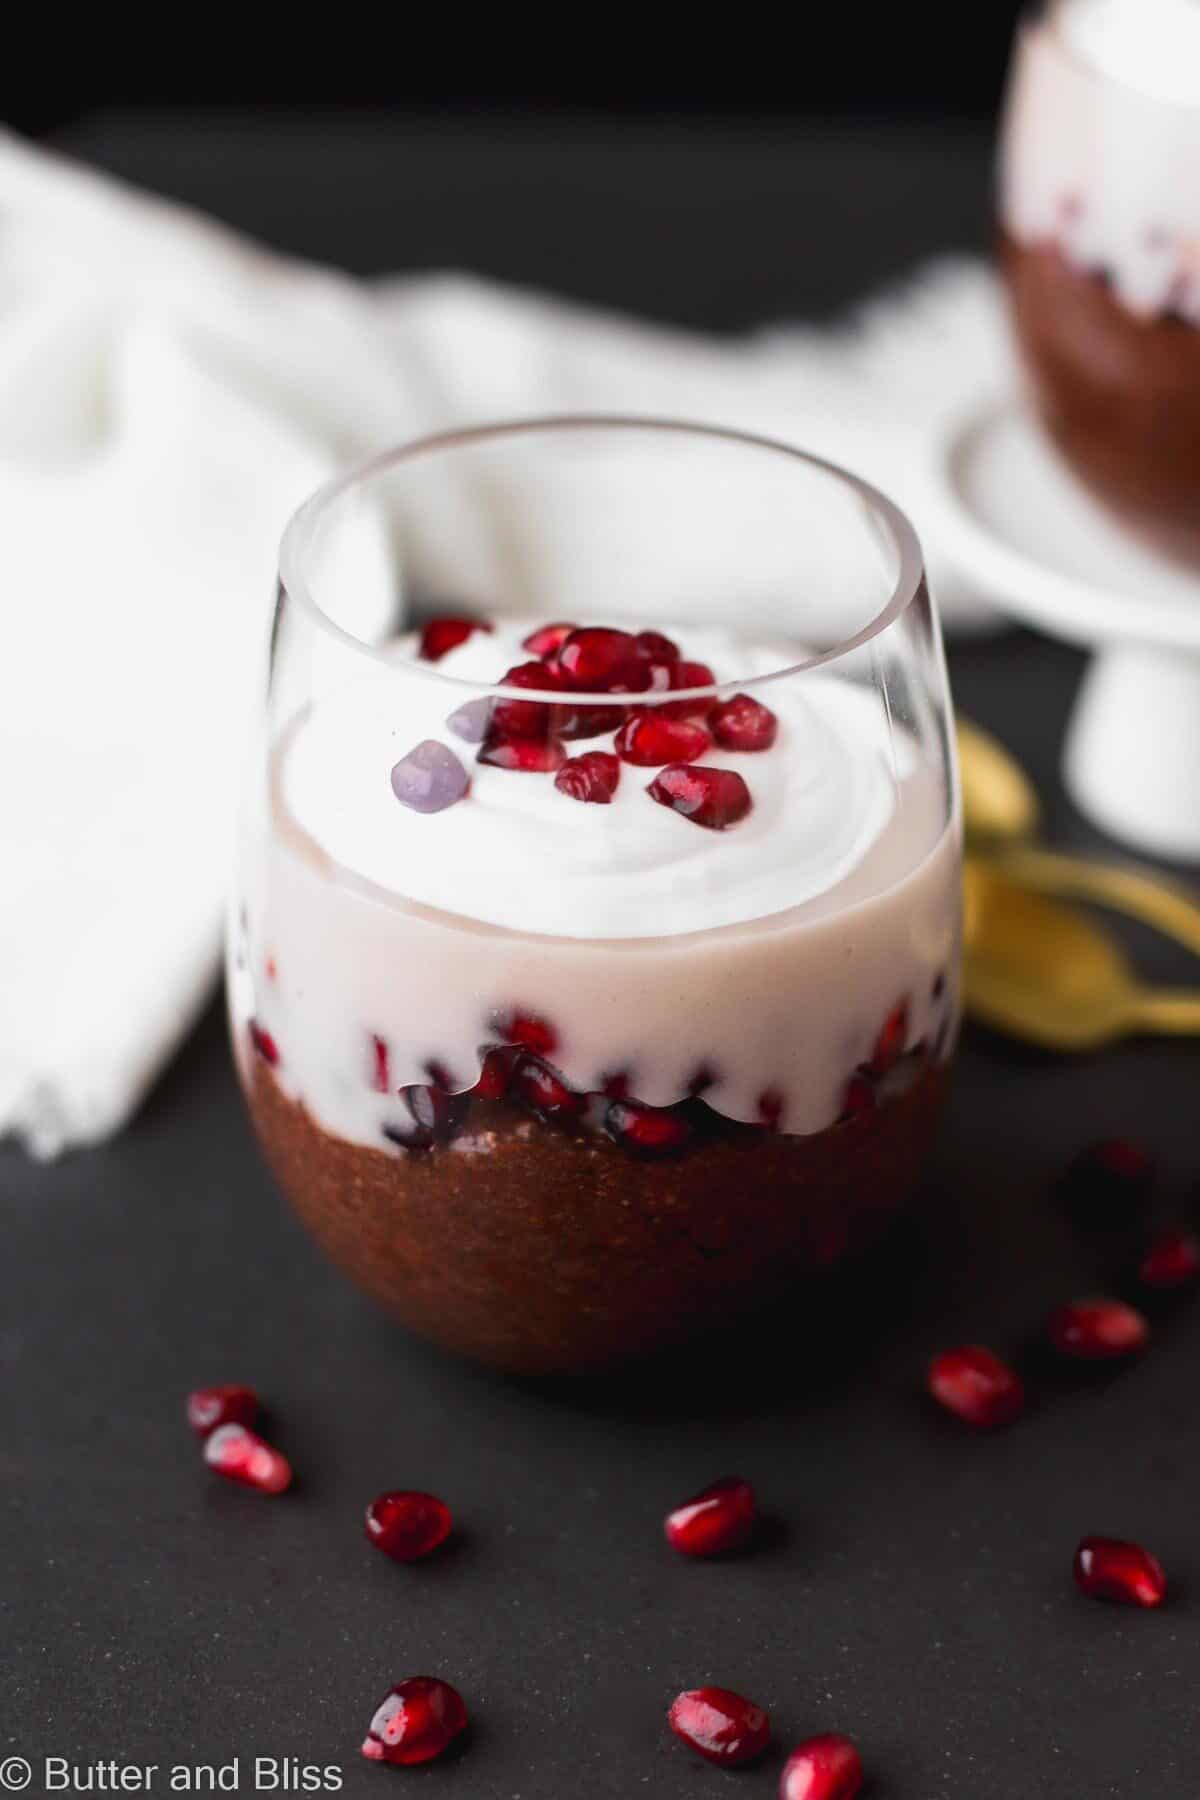 Chocolate chia pudding in a parfait glass